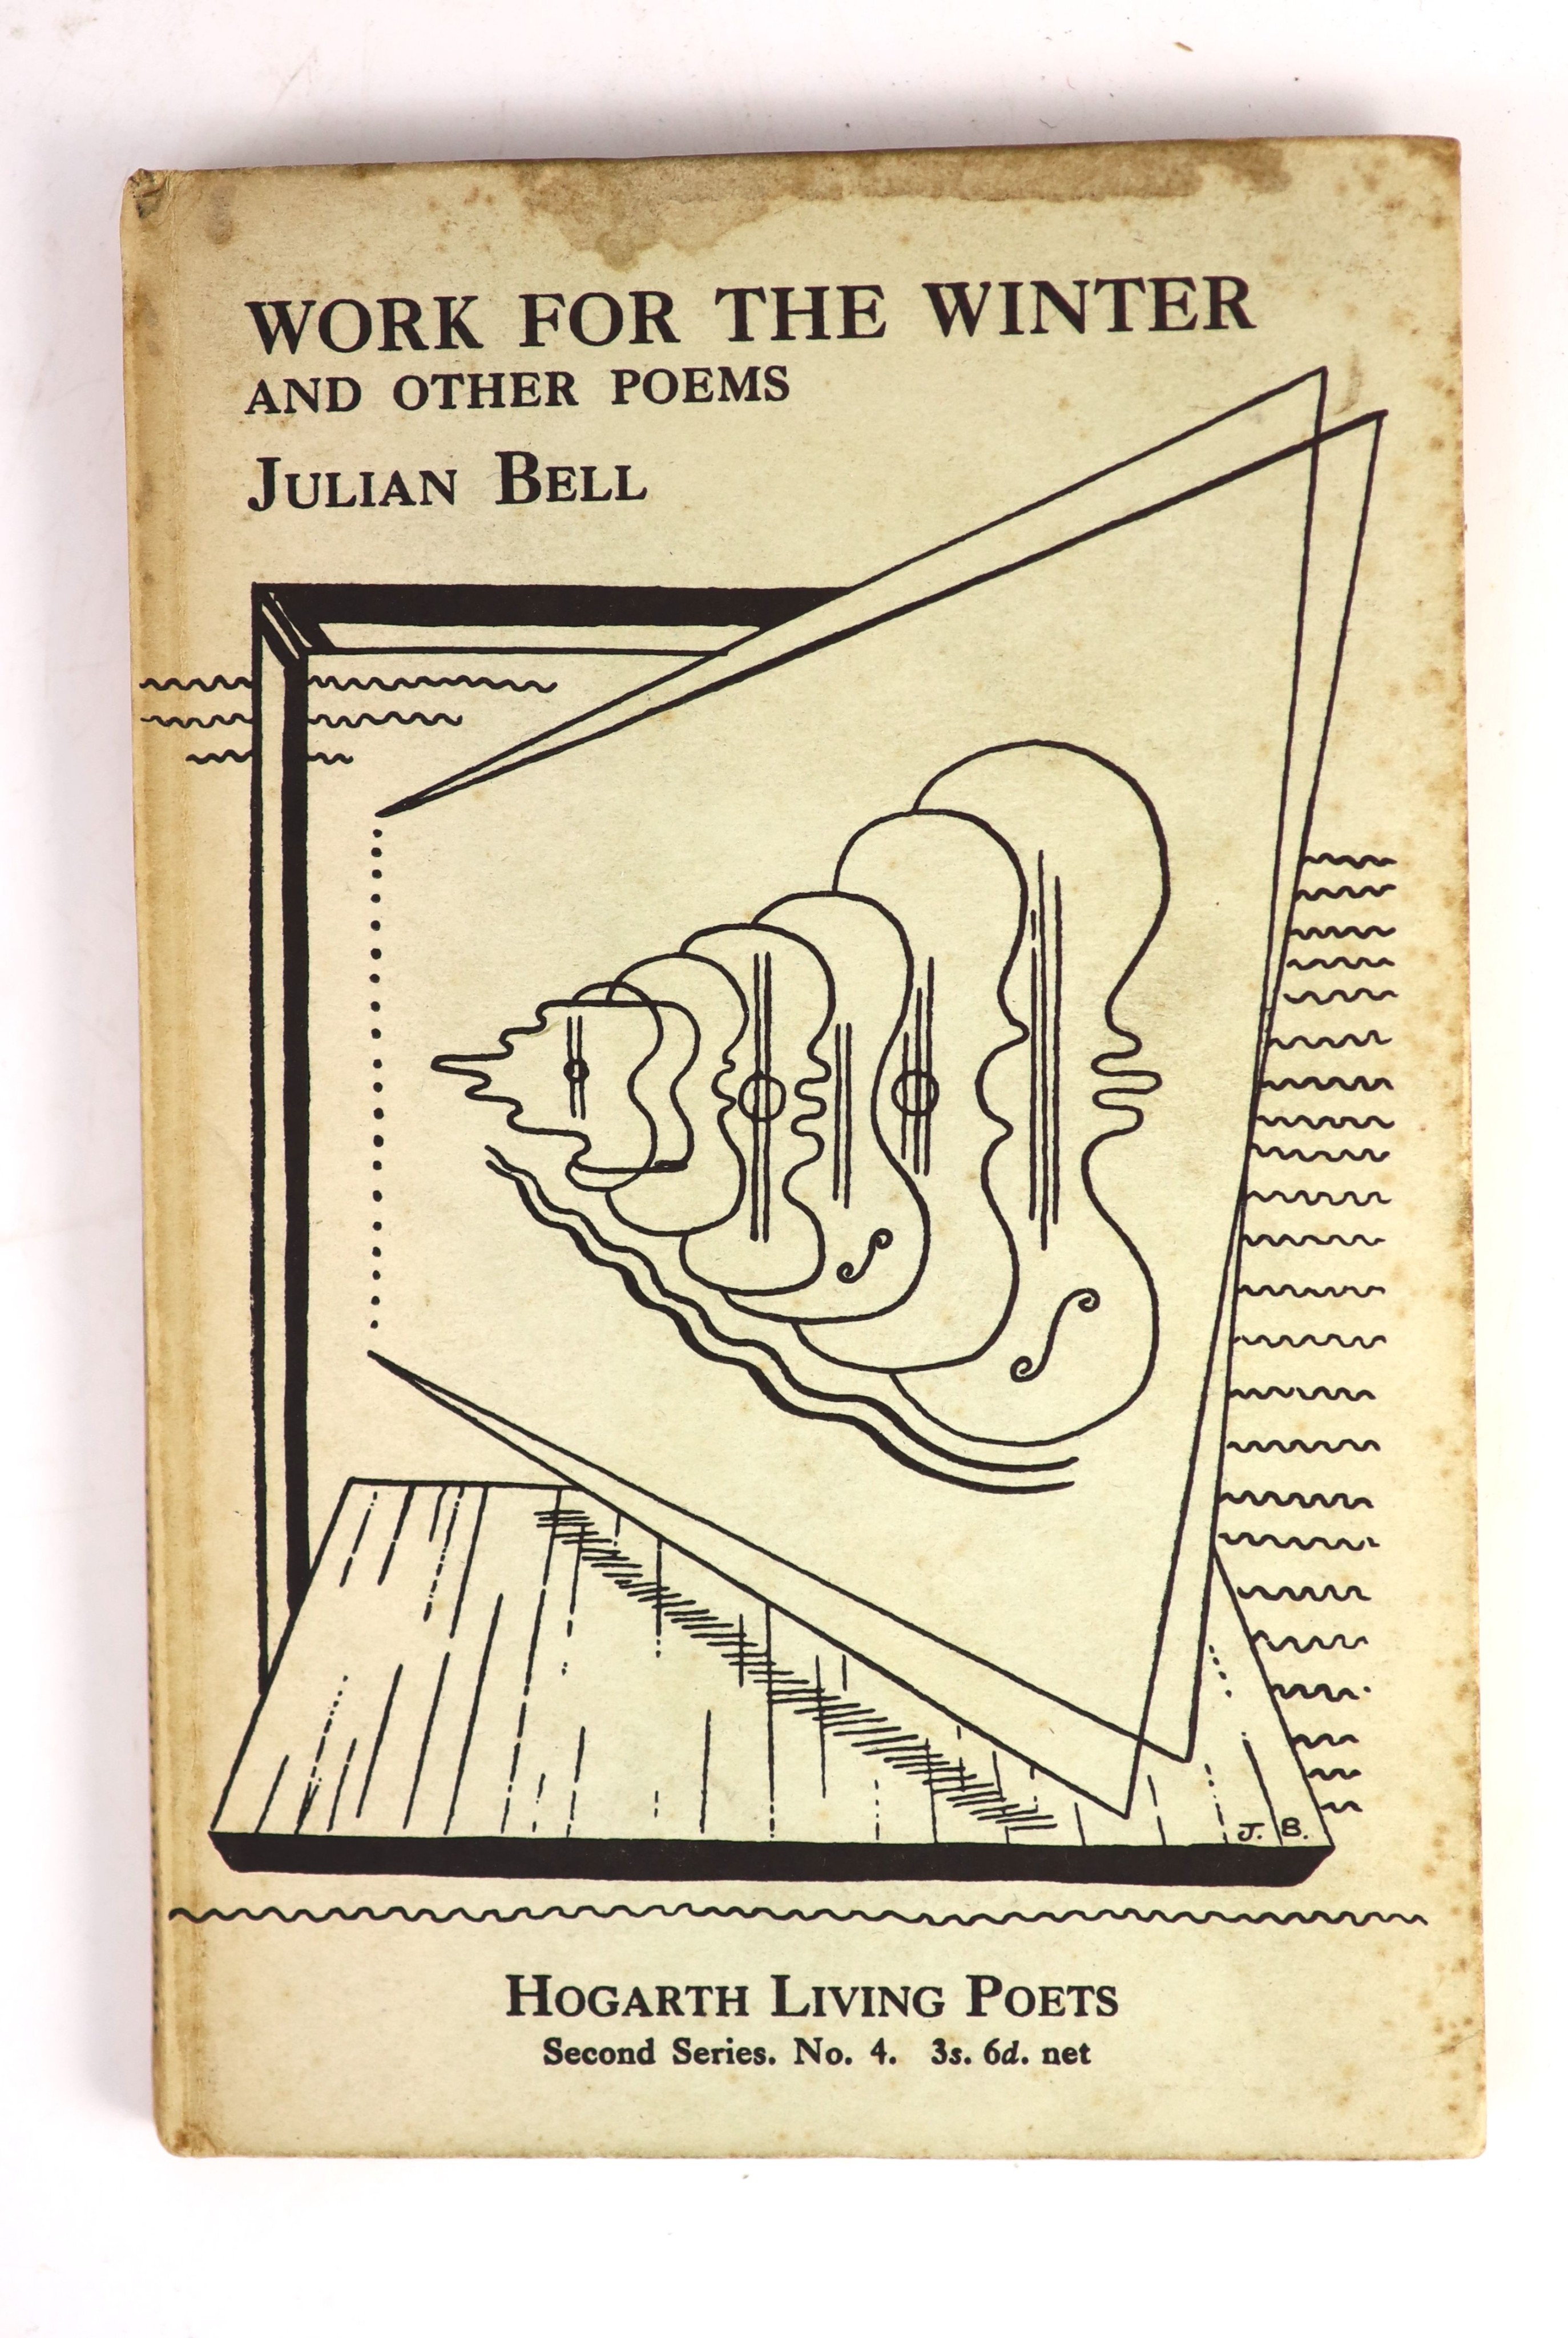 Bell, Julian - Work for the Winter and other Poems, 1st edition, 8vo, cover design by John Banting, a Hogarth Press press review copy, with slip, 750 copies were printed, but, according to Woolmer, 450 were pulped, Hogar